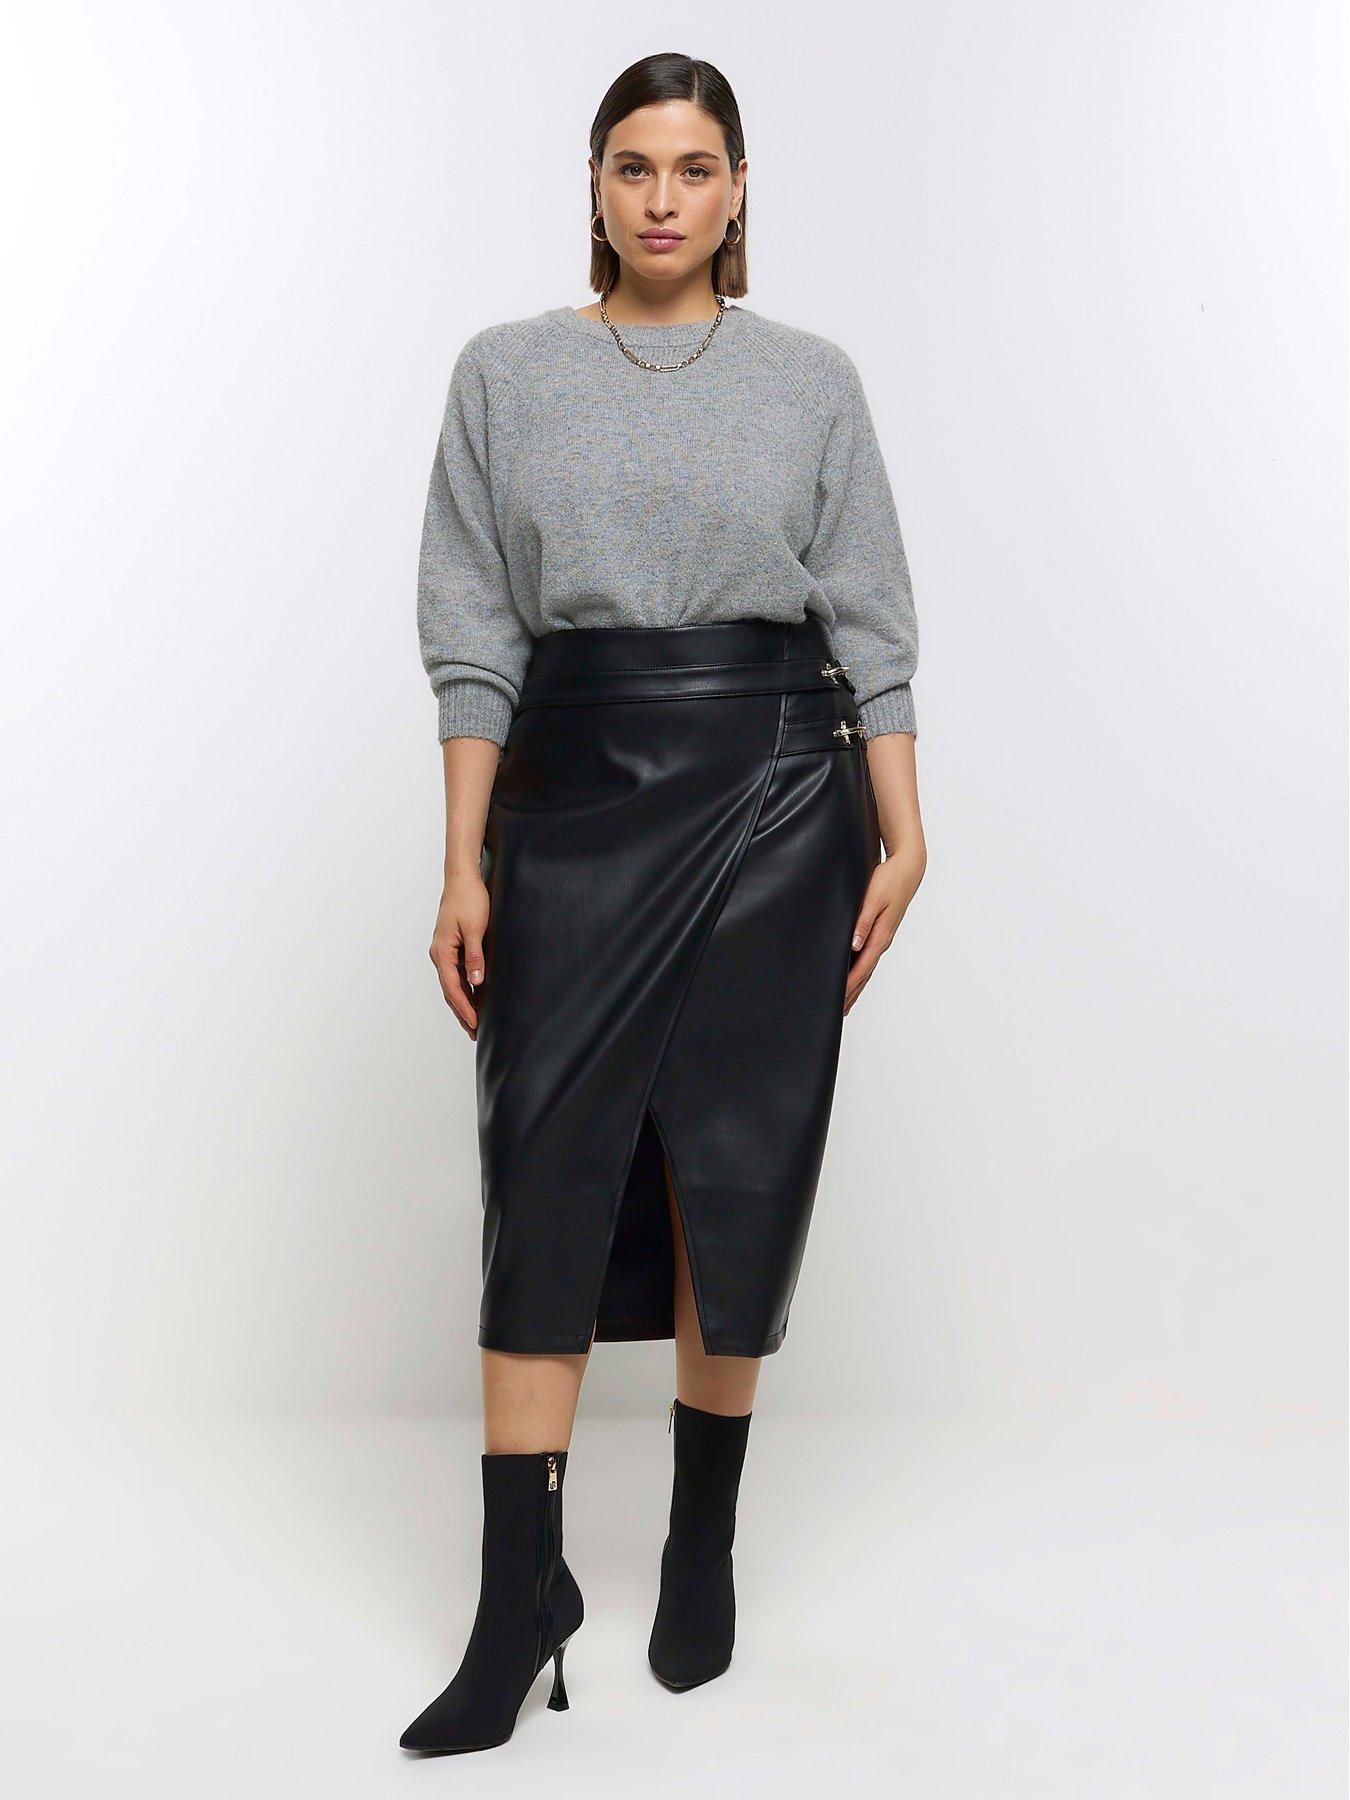 YOURS LONDON Plus Size Black Ruffle Leather Look Skirt